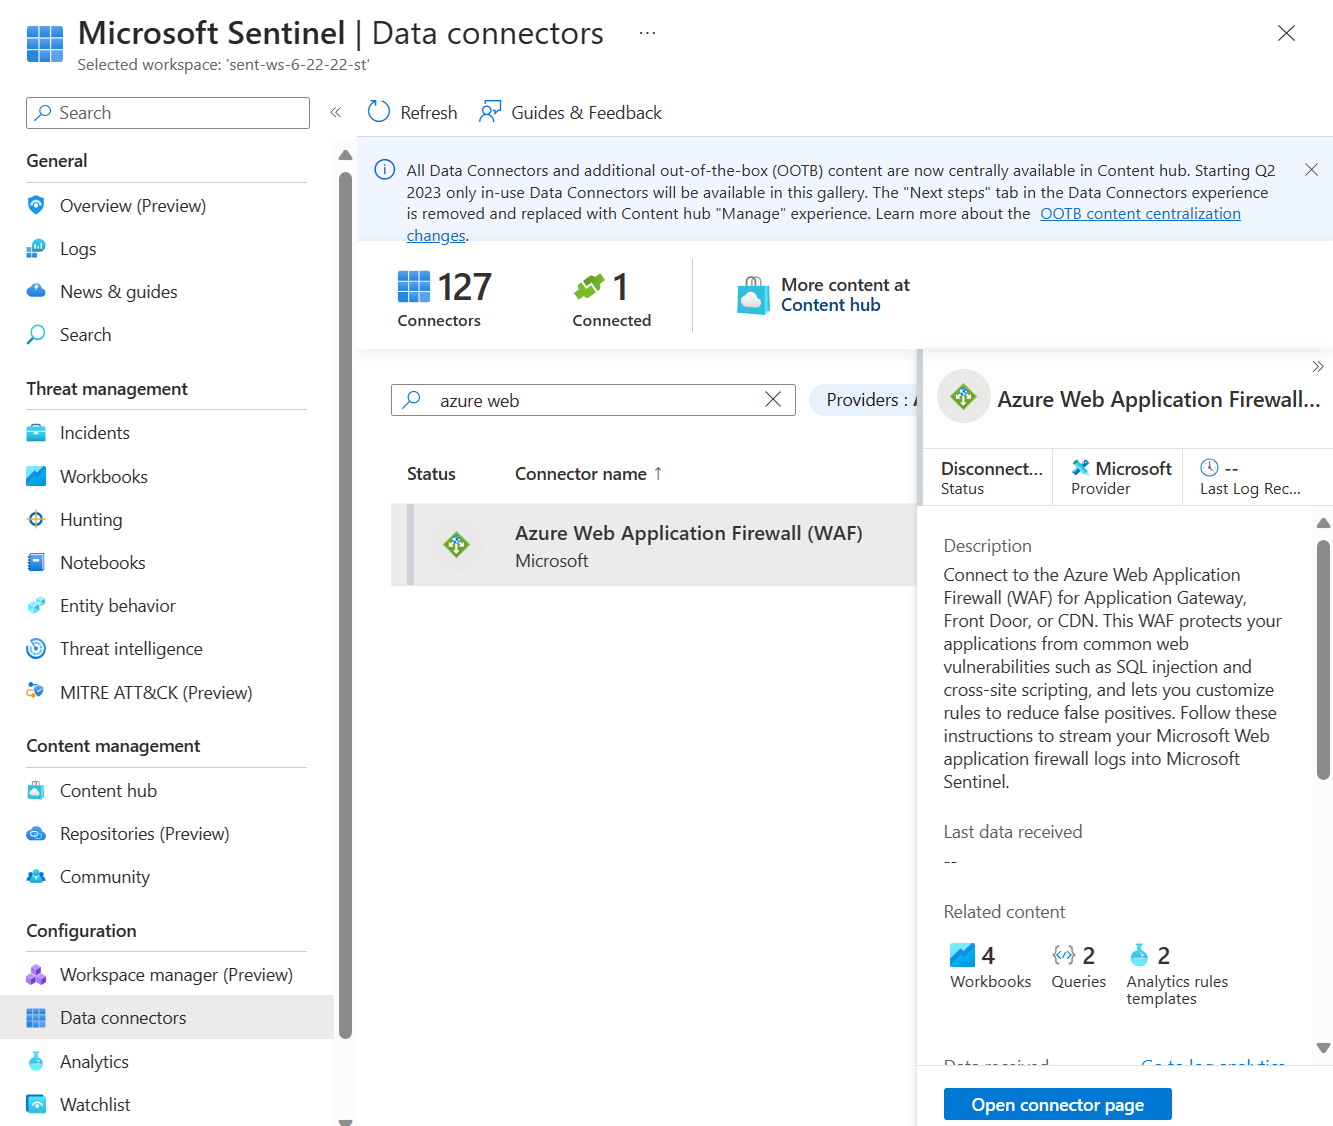 Screenshot of the data connector in Microsoft Sentinel.